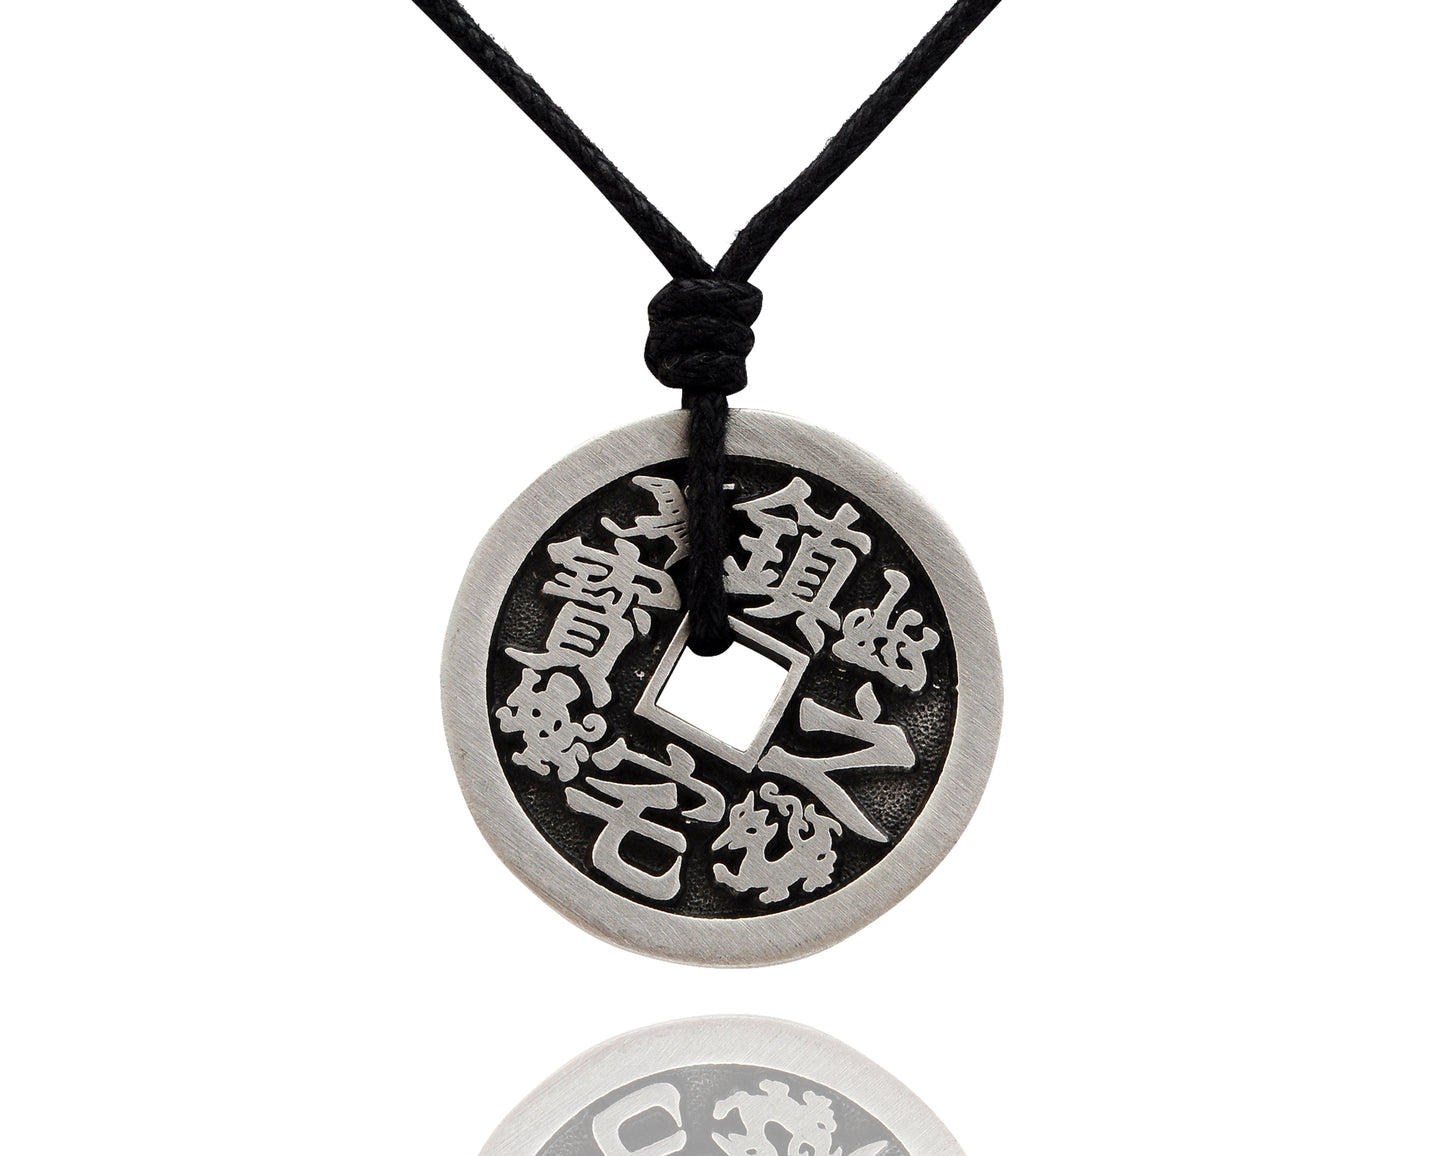 New Chinese Zodiac I-ching Silver Pewter Charm Necklace Pendant Jewelry